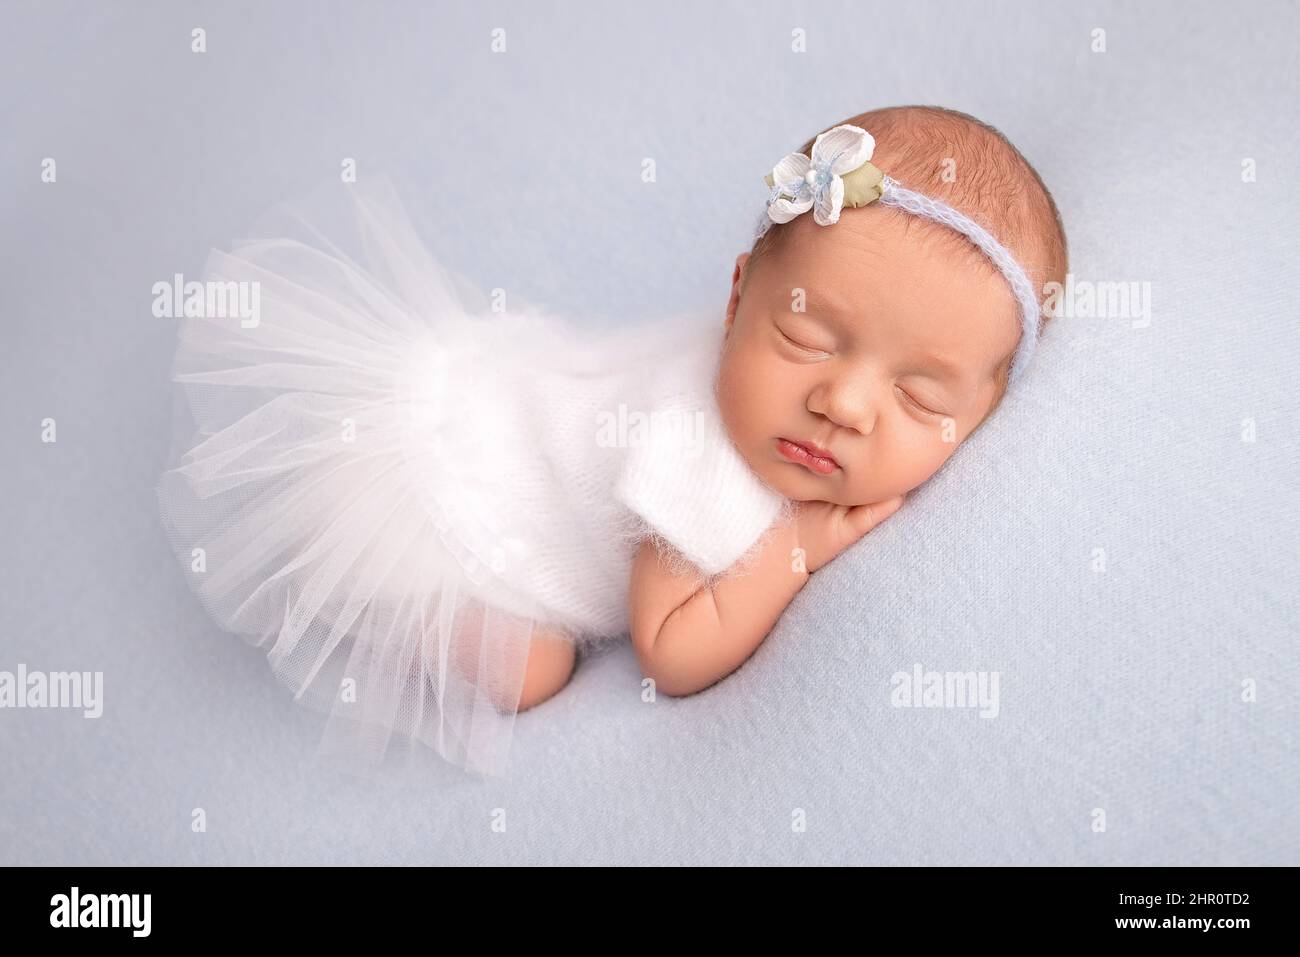 Sleeping newborn girl in a white ballet dress with a white bandage and a blue flower.Portrait of a newborn ballerina. Stock Photo